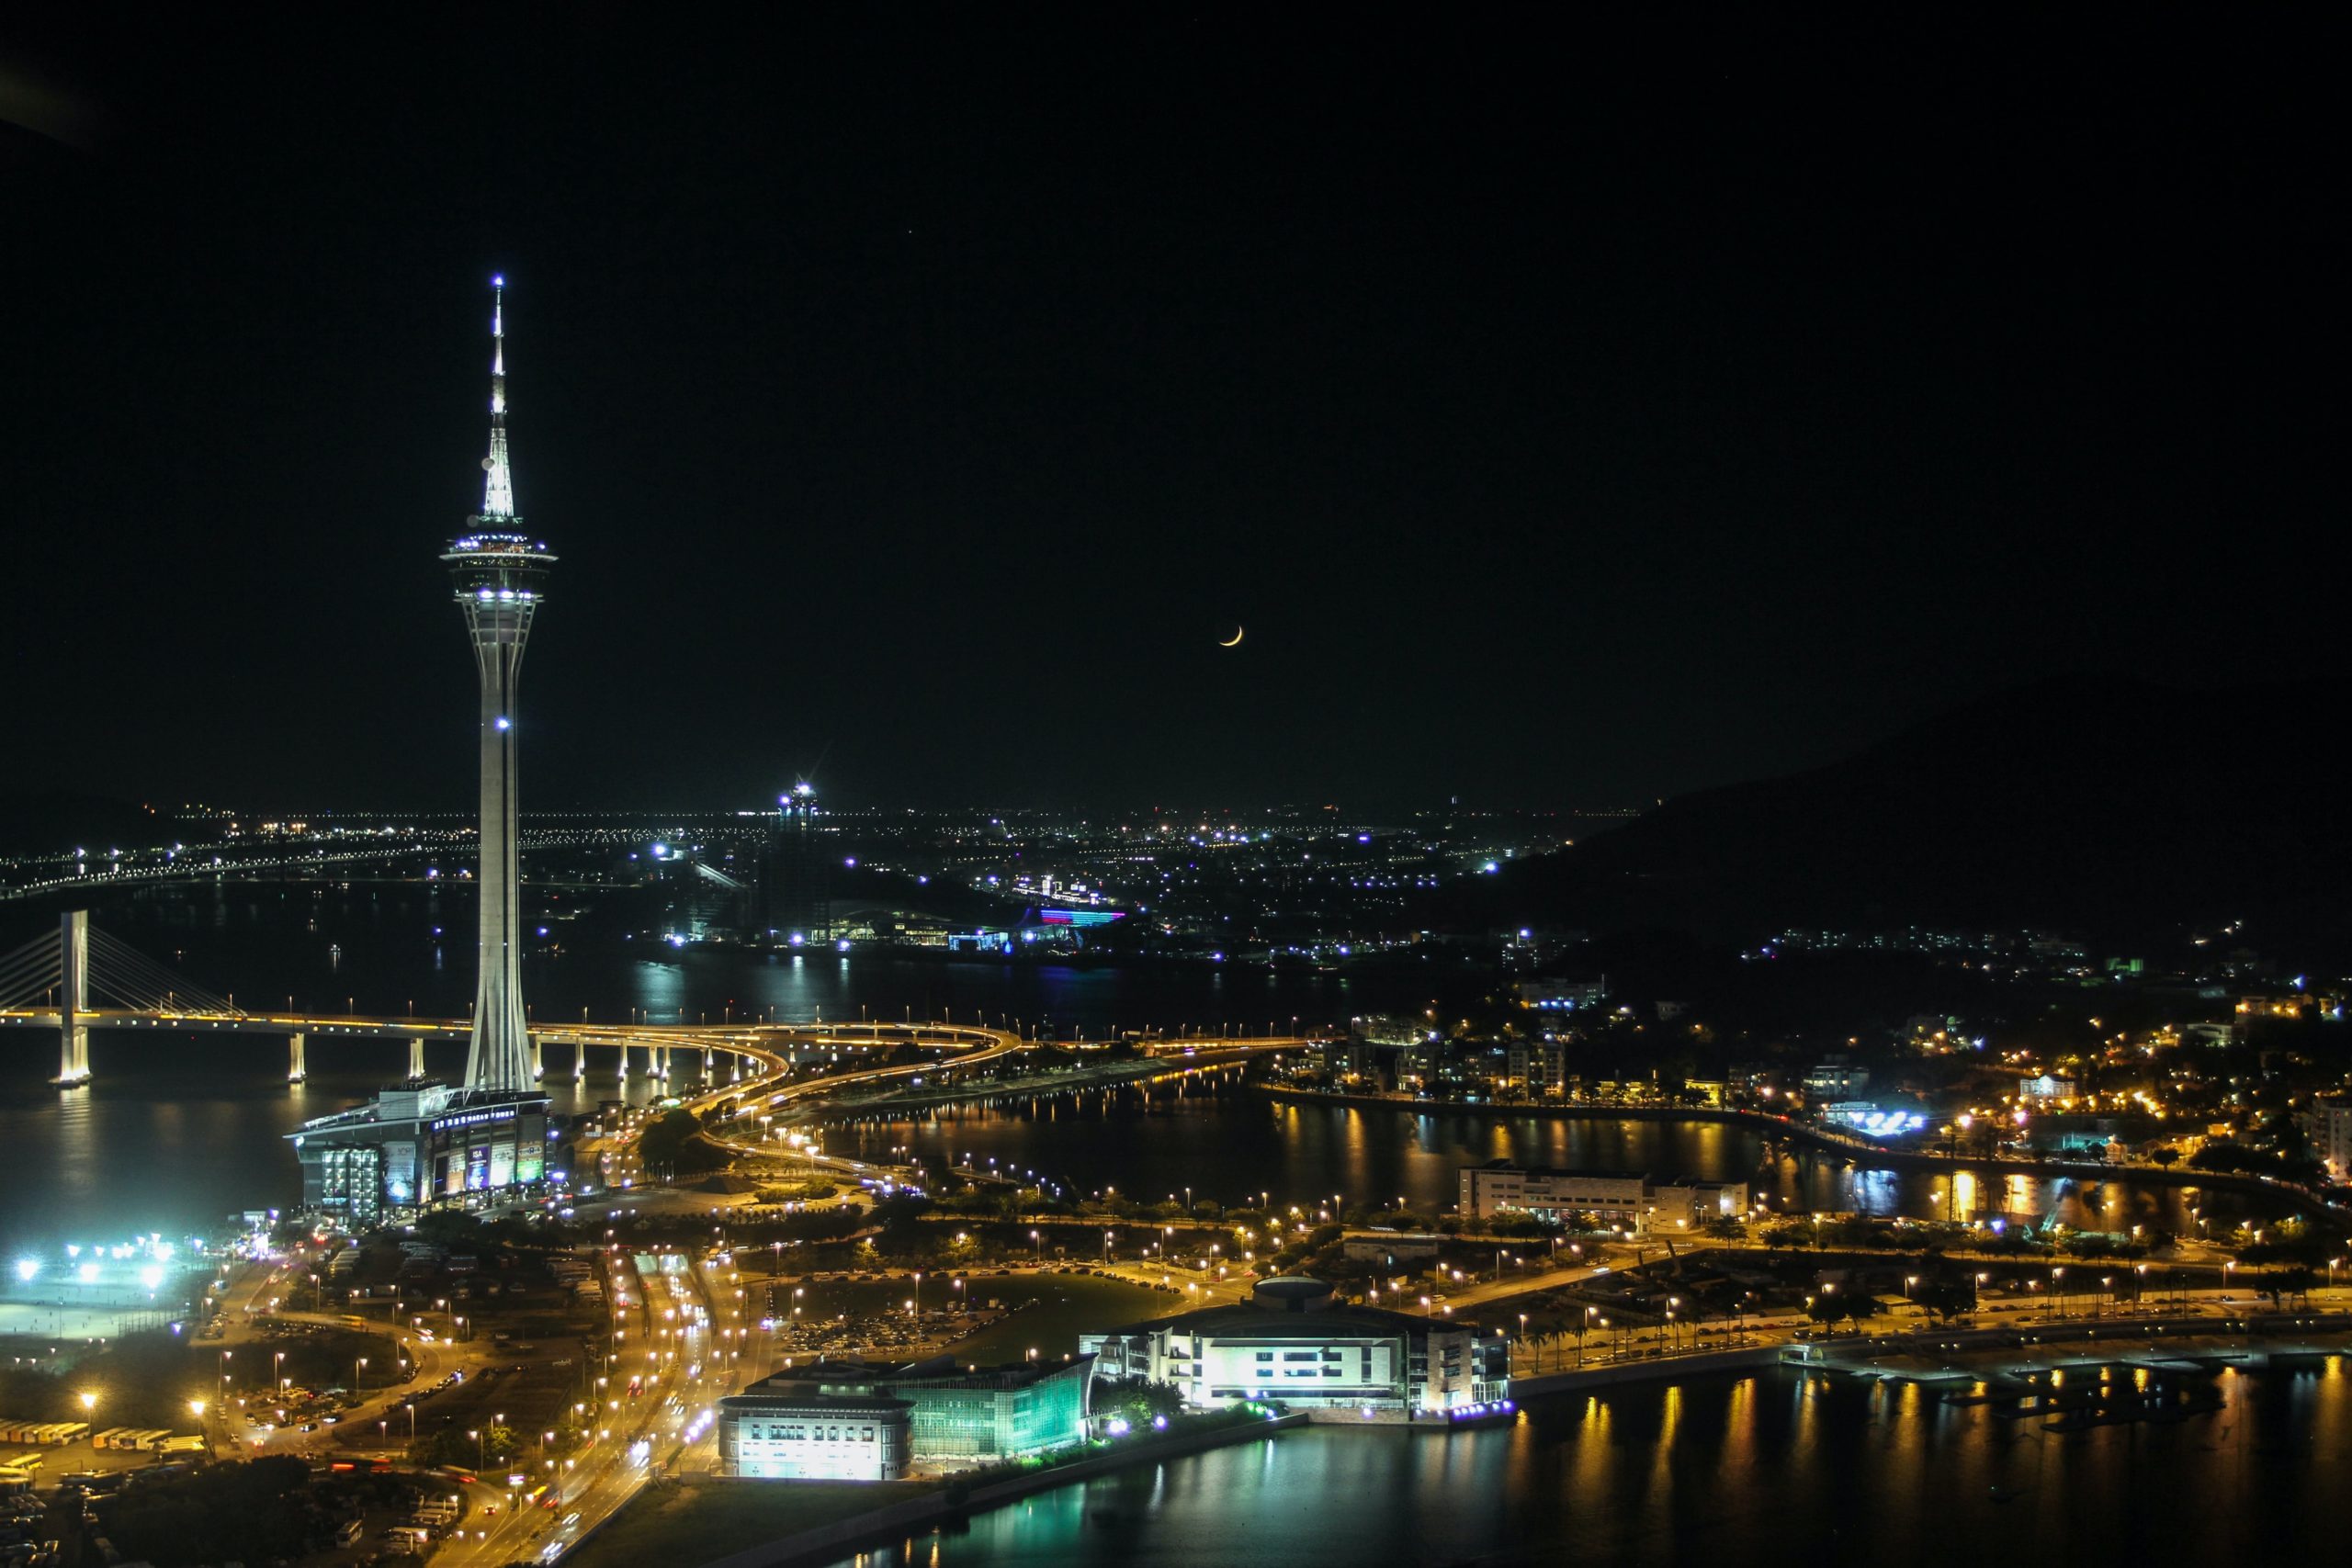 10 Awesome Things to Do in Macau